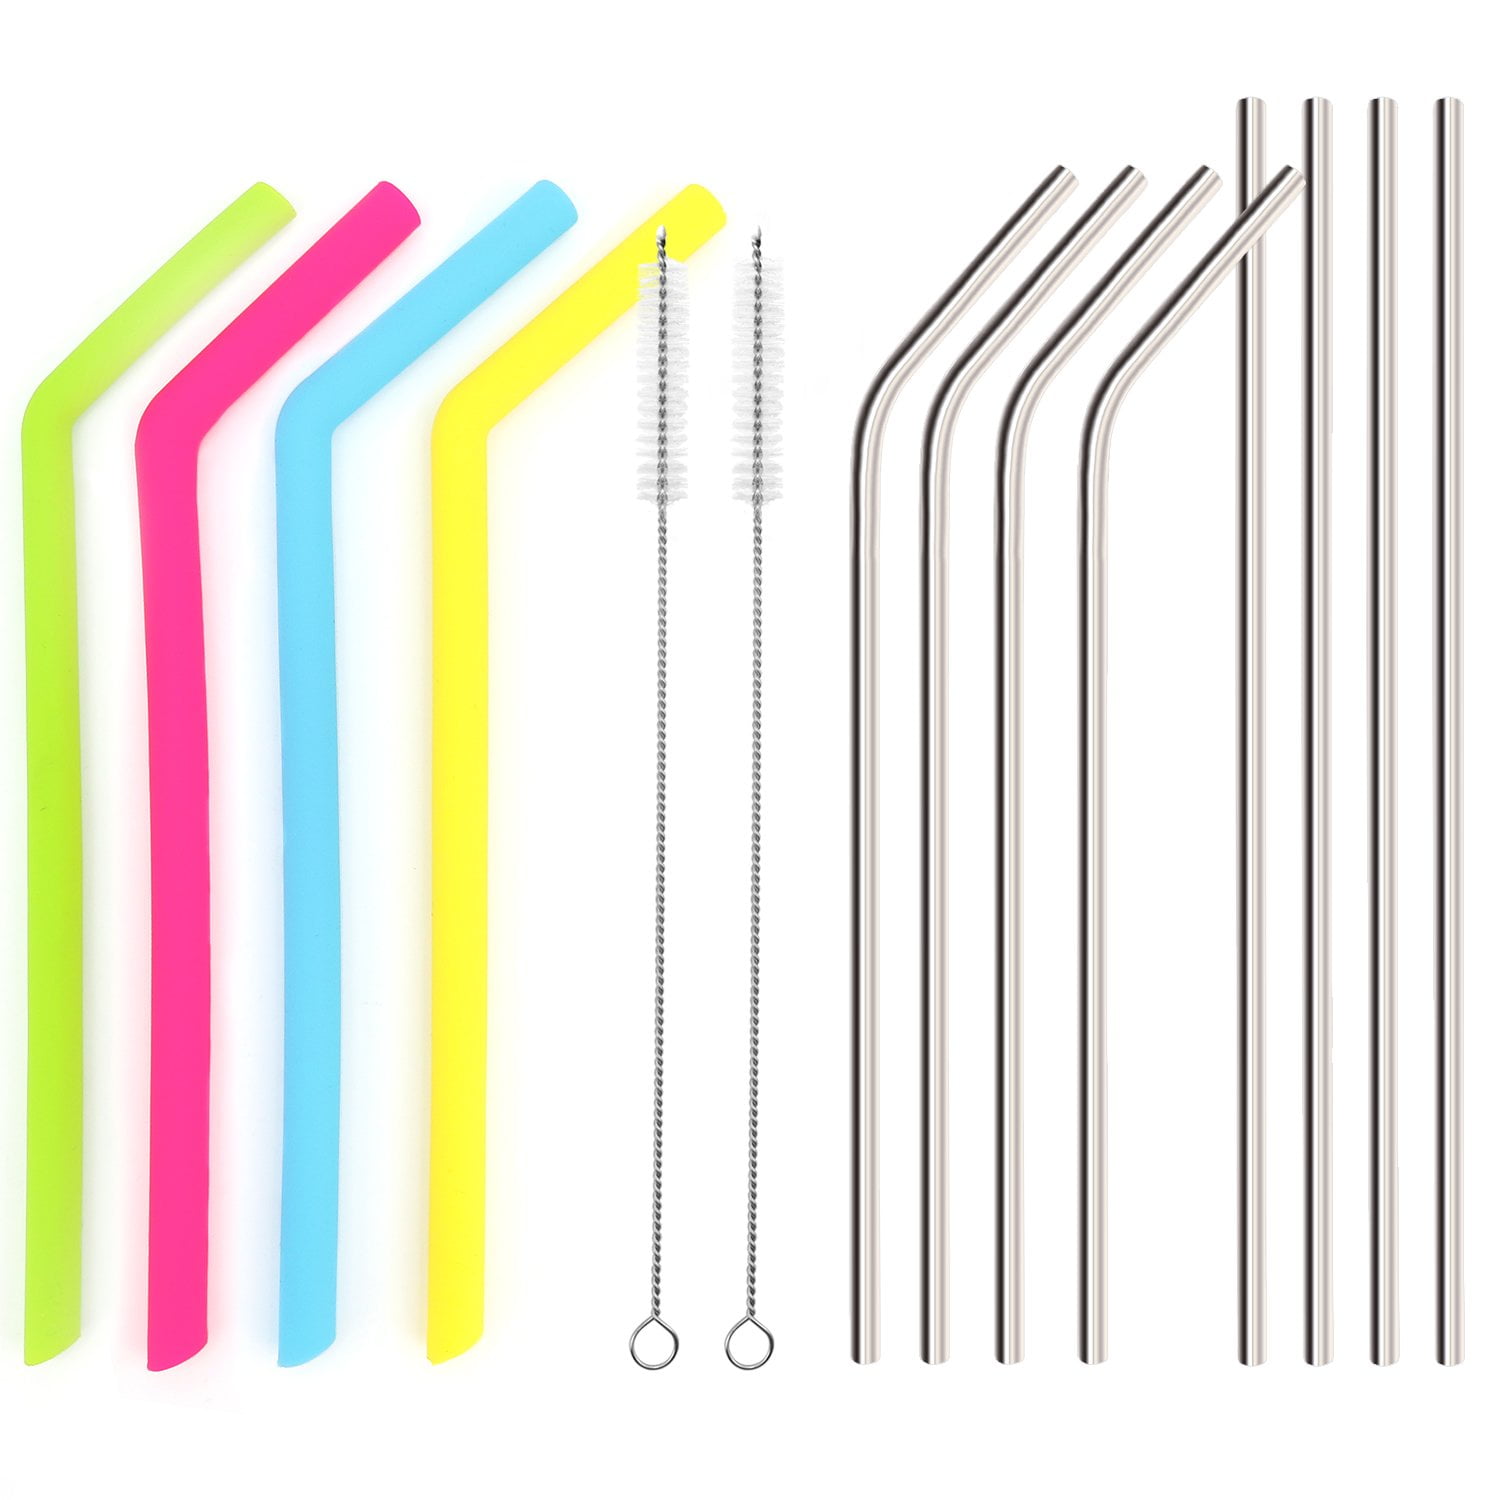 Kichwit Extra Long Stainless Steel Straws Set of 8, Reusable Wide Straws  for Smoothies, 10.5 Inches Long, 5/16 Wide, Metal Drinking Straws, 2